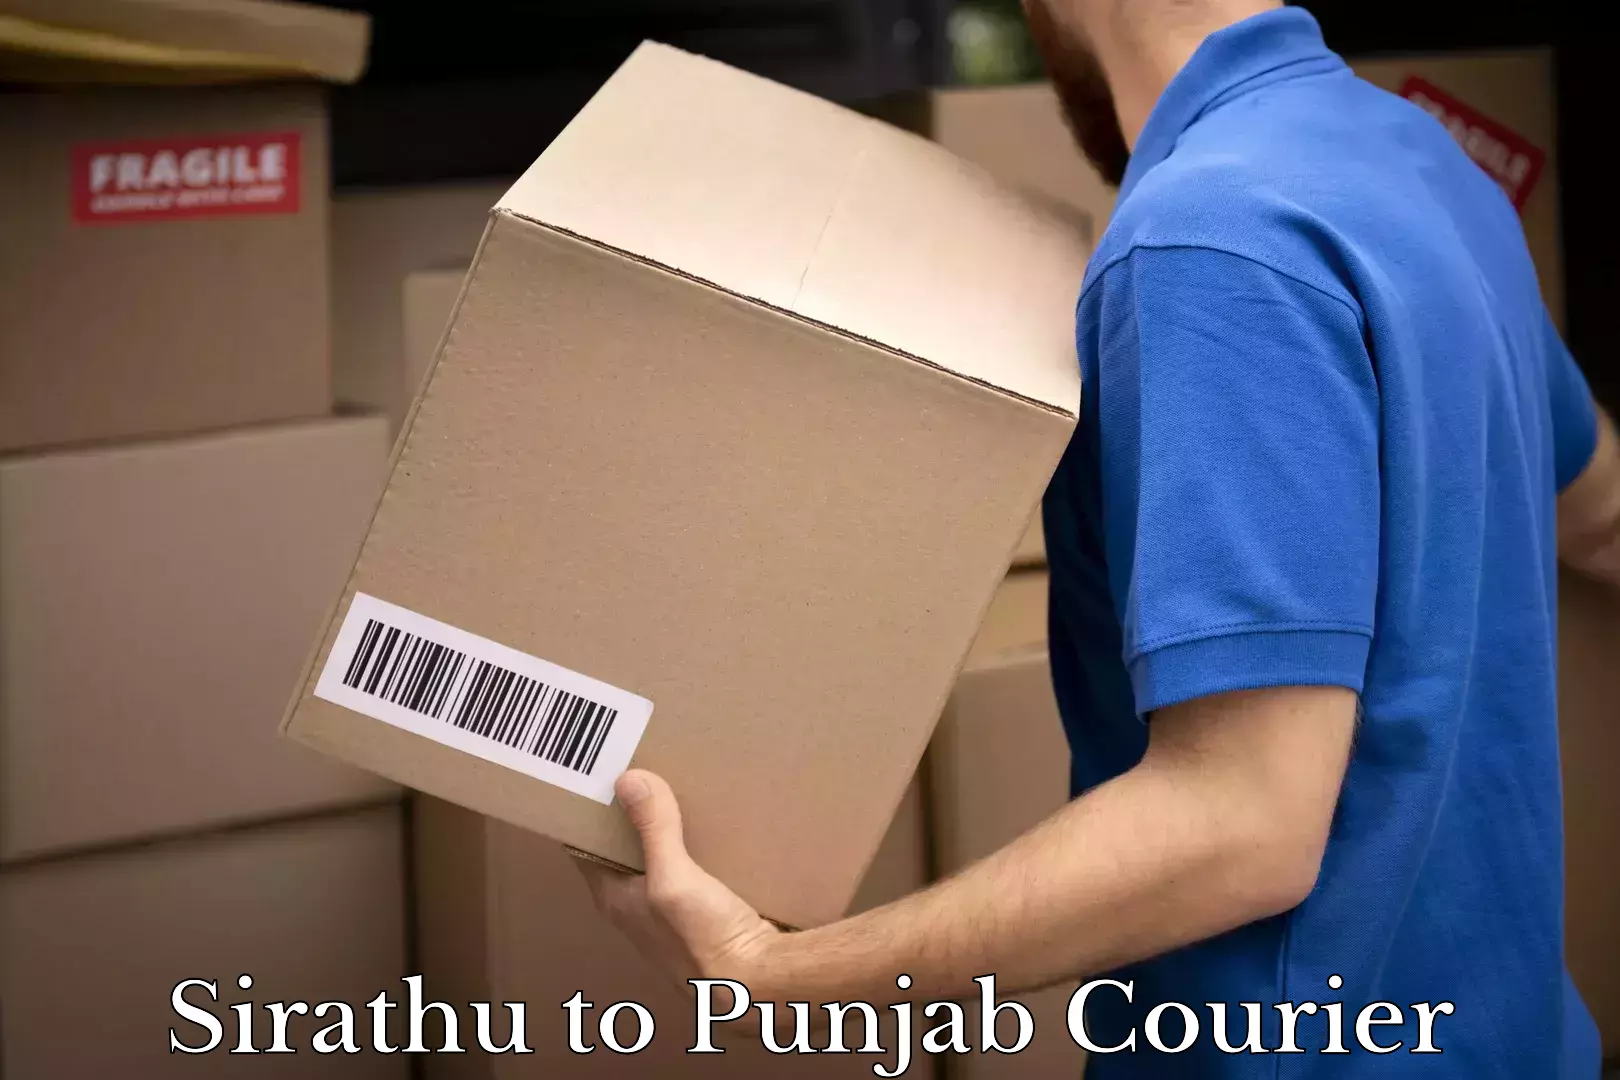 Sustainable courier practices Sirathu to Punjab